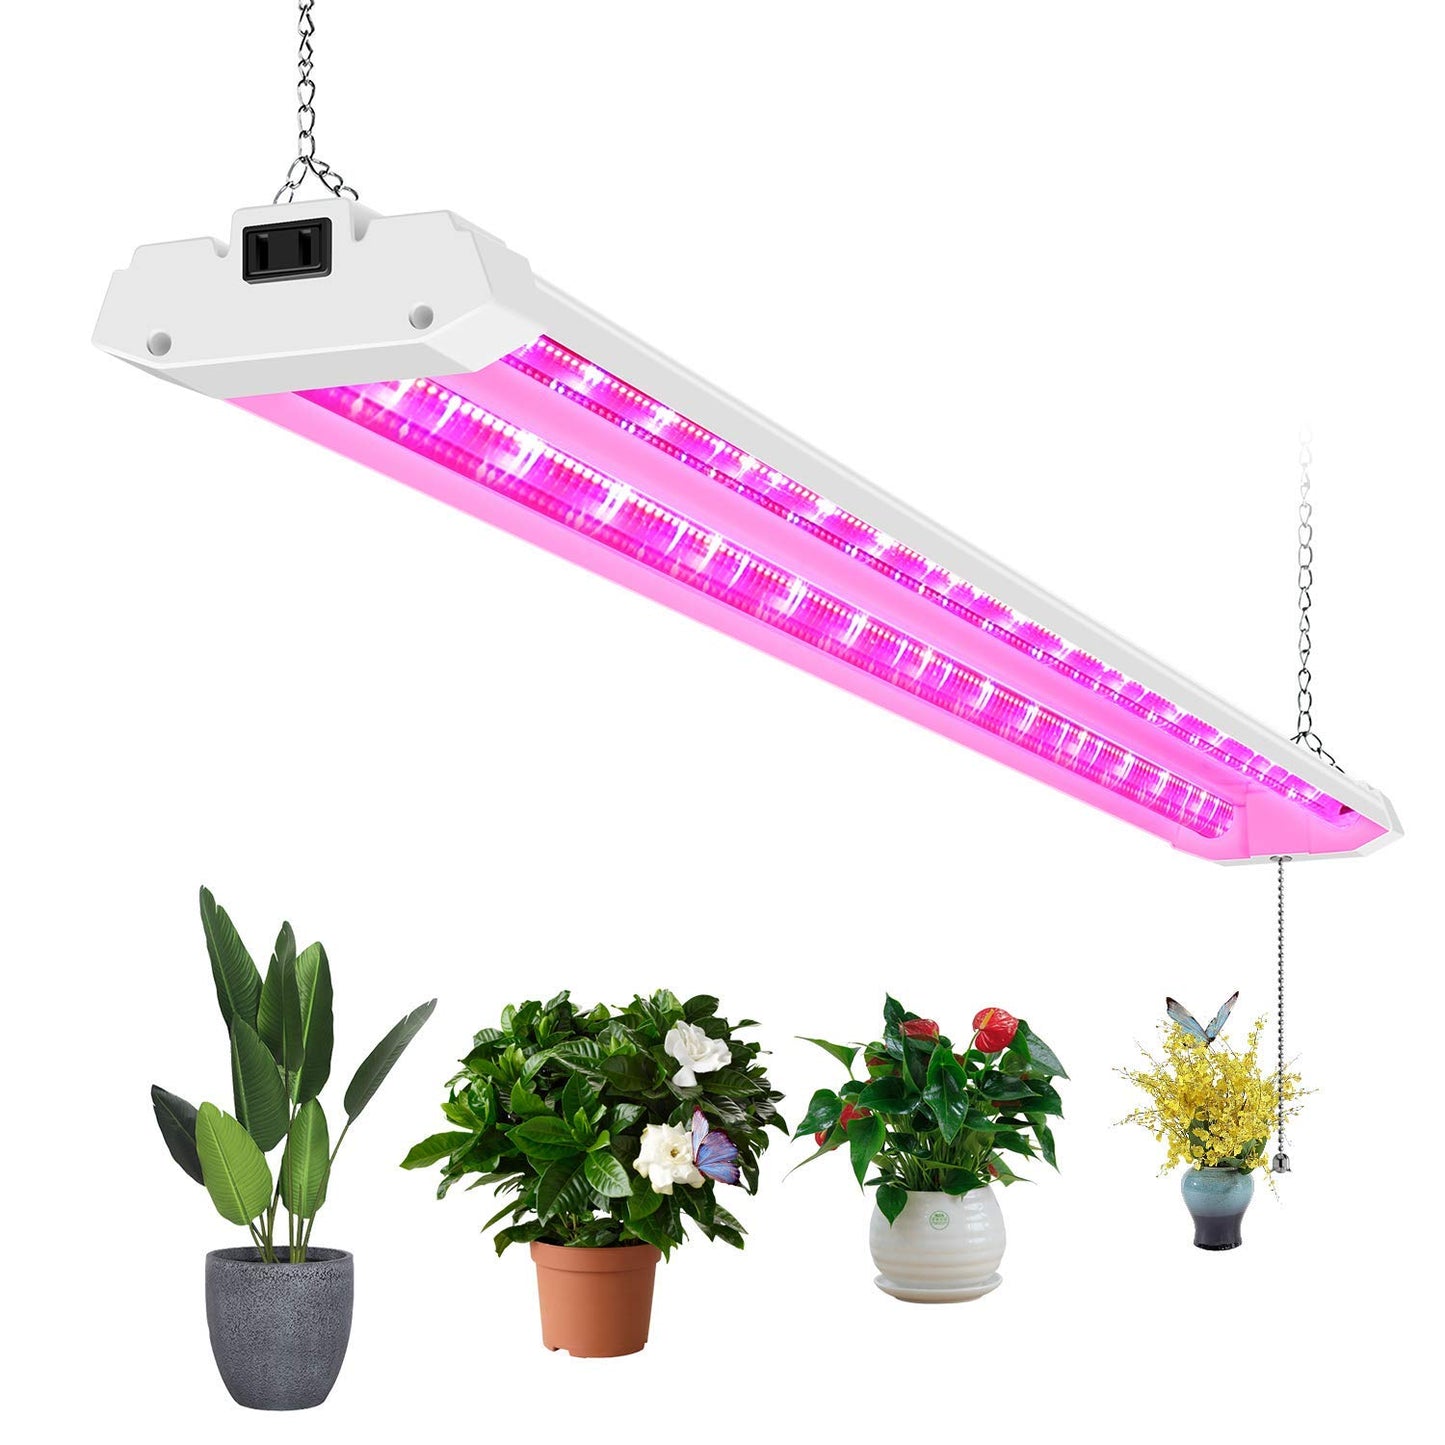 AntLux 4ft LED Grow Lights 50W Full Spectrum Integrated Growing Lamp Fixtures for Greenhouse Hydroponic Indoor Plant Seedling Veg and Flower, Plug in, ON/Off Pull Chain Included